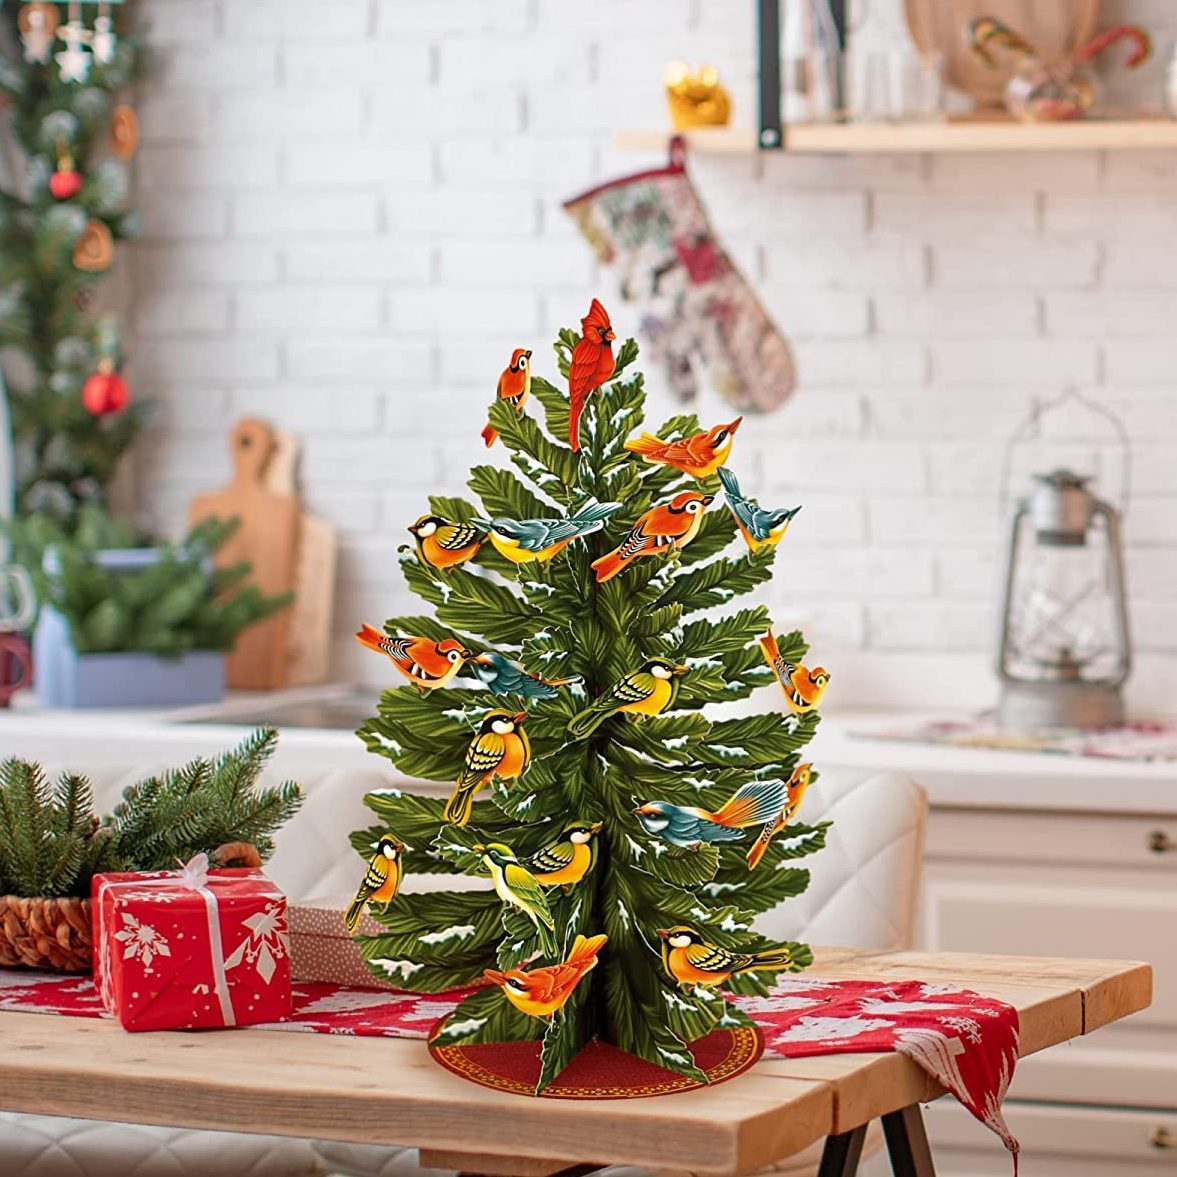 Christmas Tree Alternatives: 21 Ideas for Any Space [Updated]